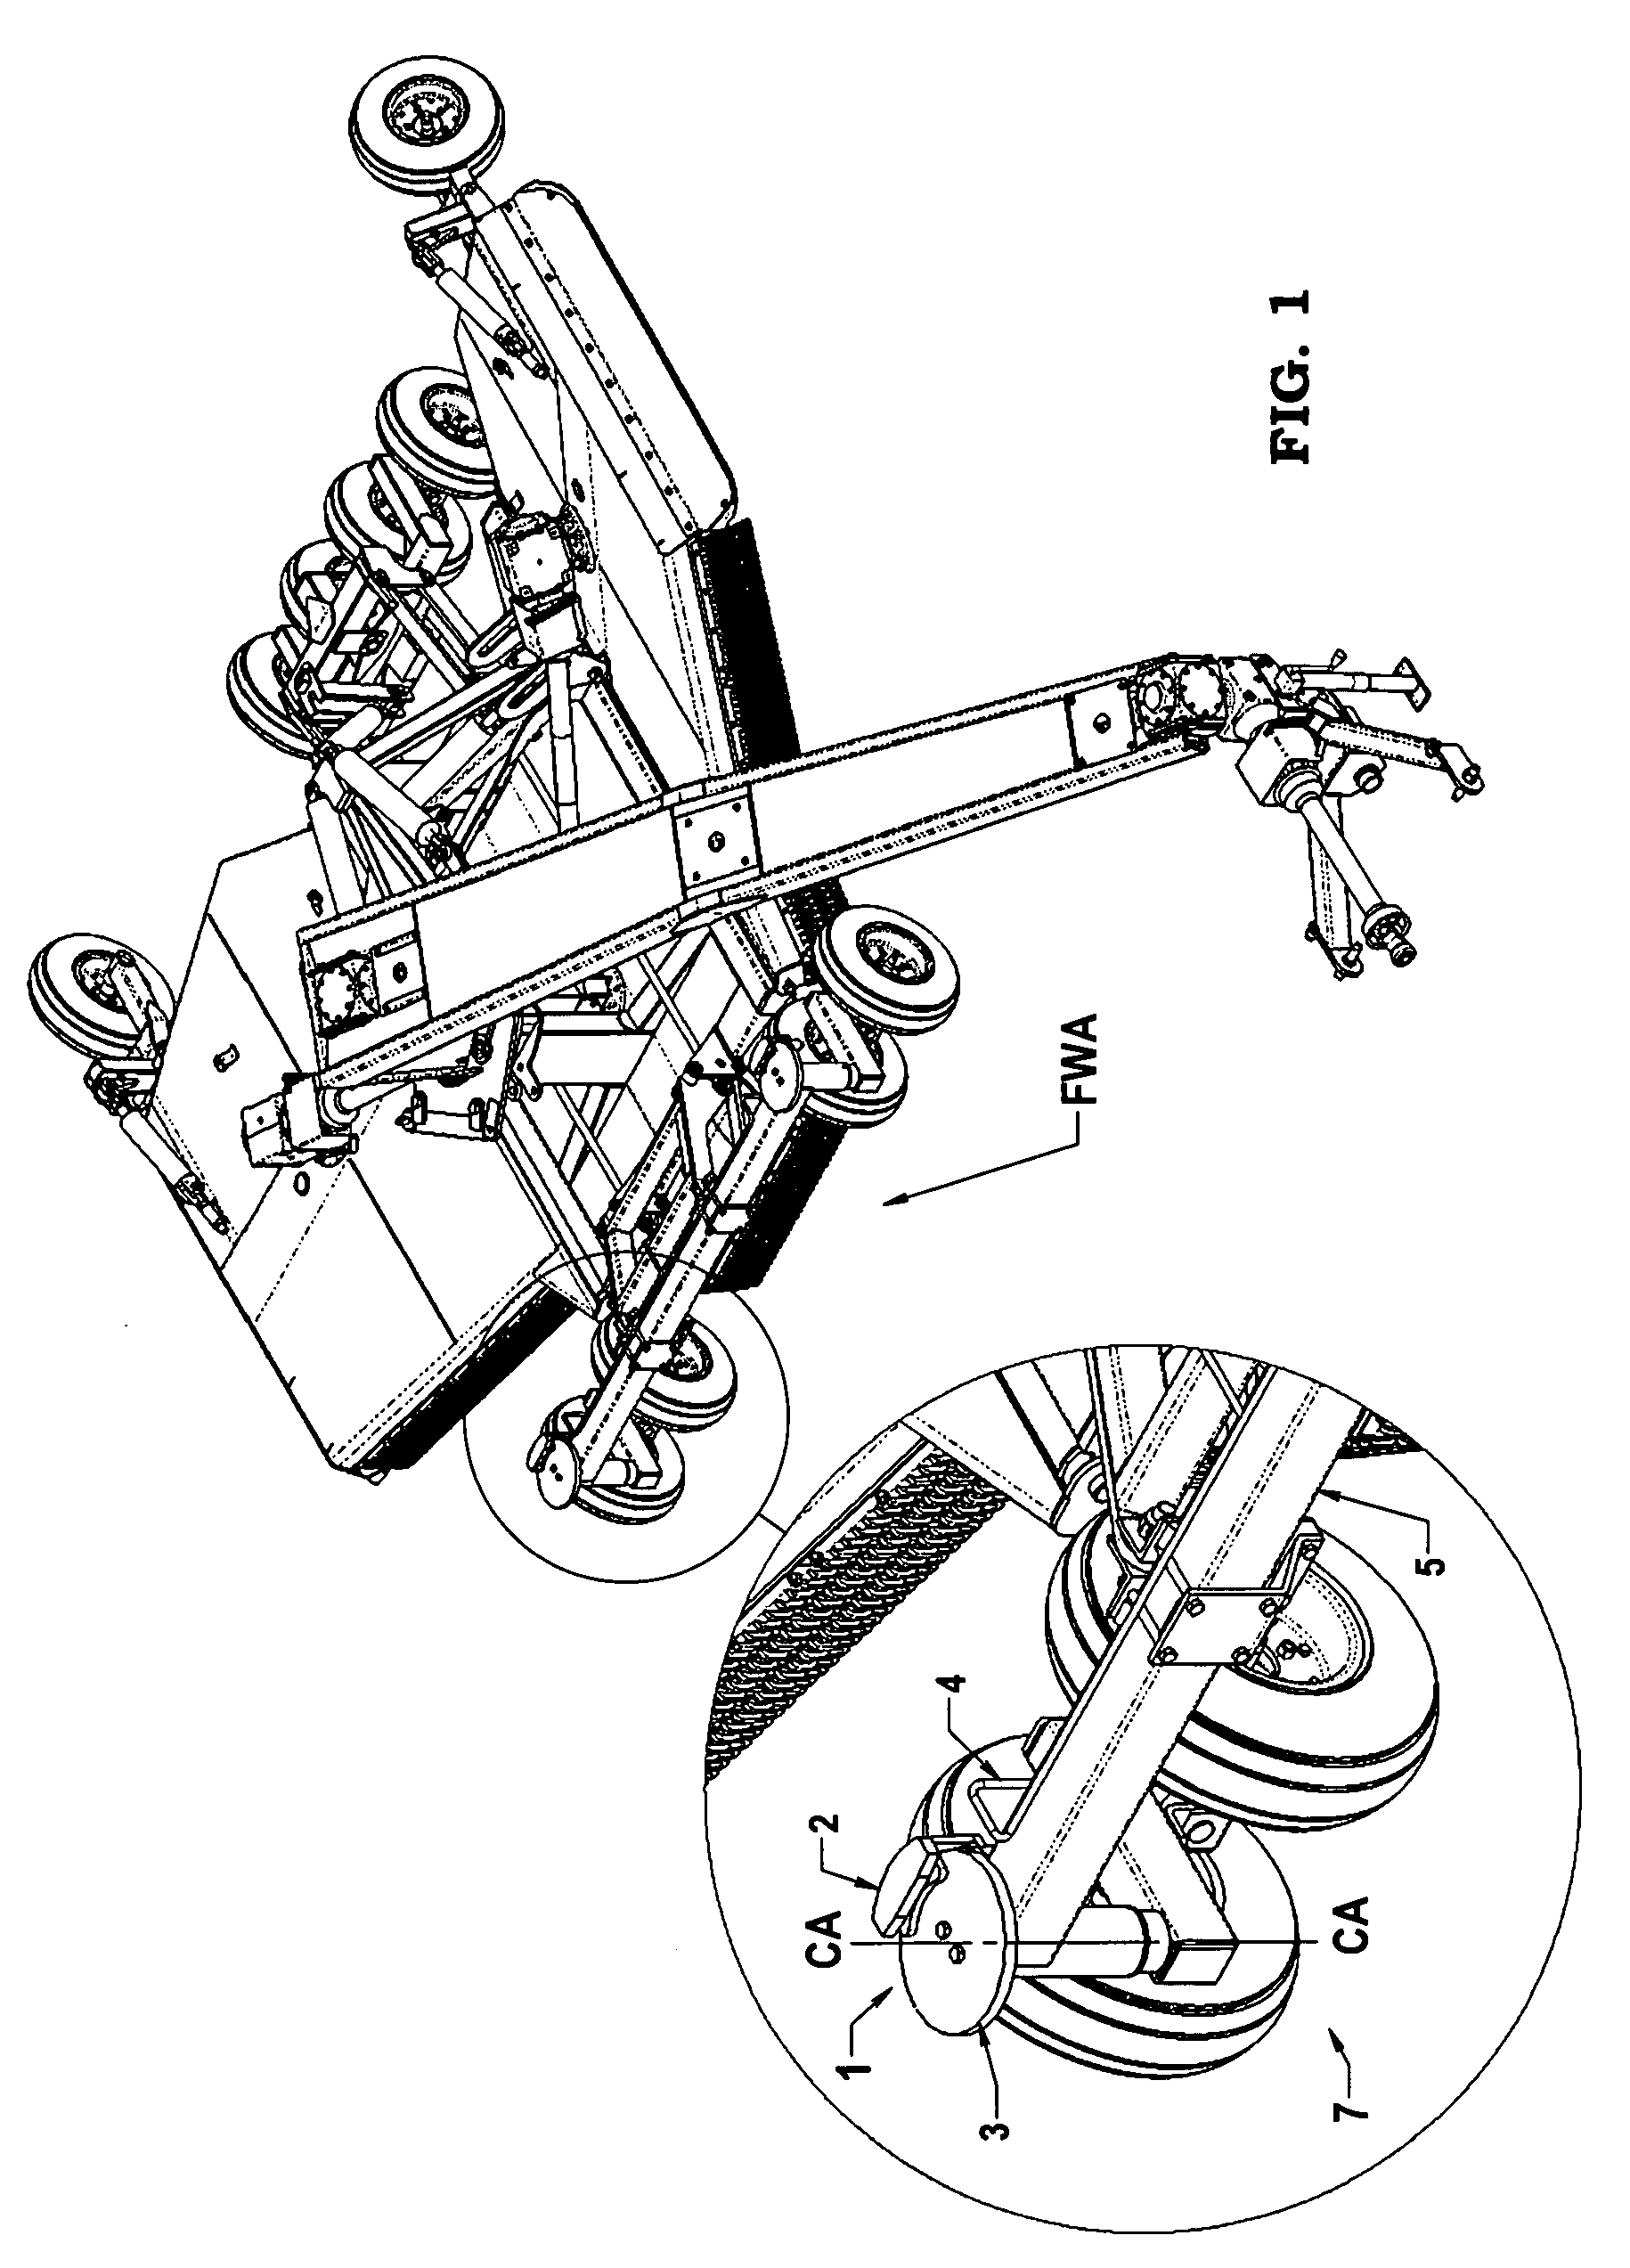 Brake Mechanism for a Caster Wheel on a Offset Rotary Mower